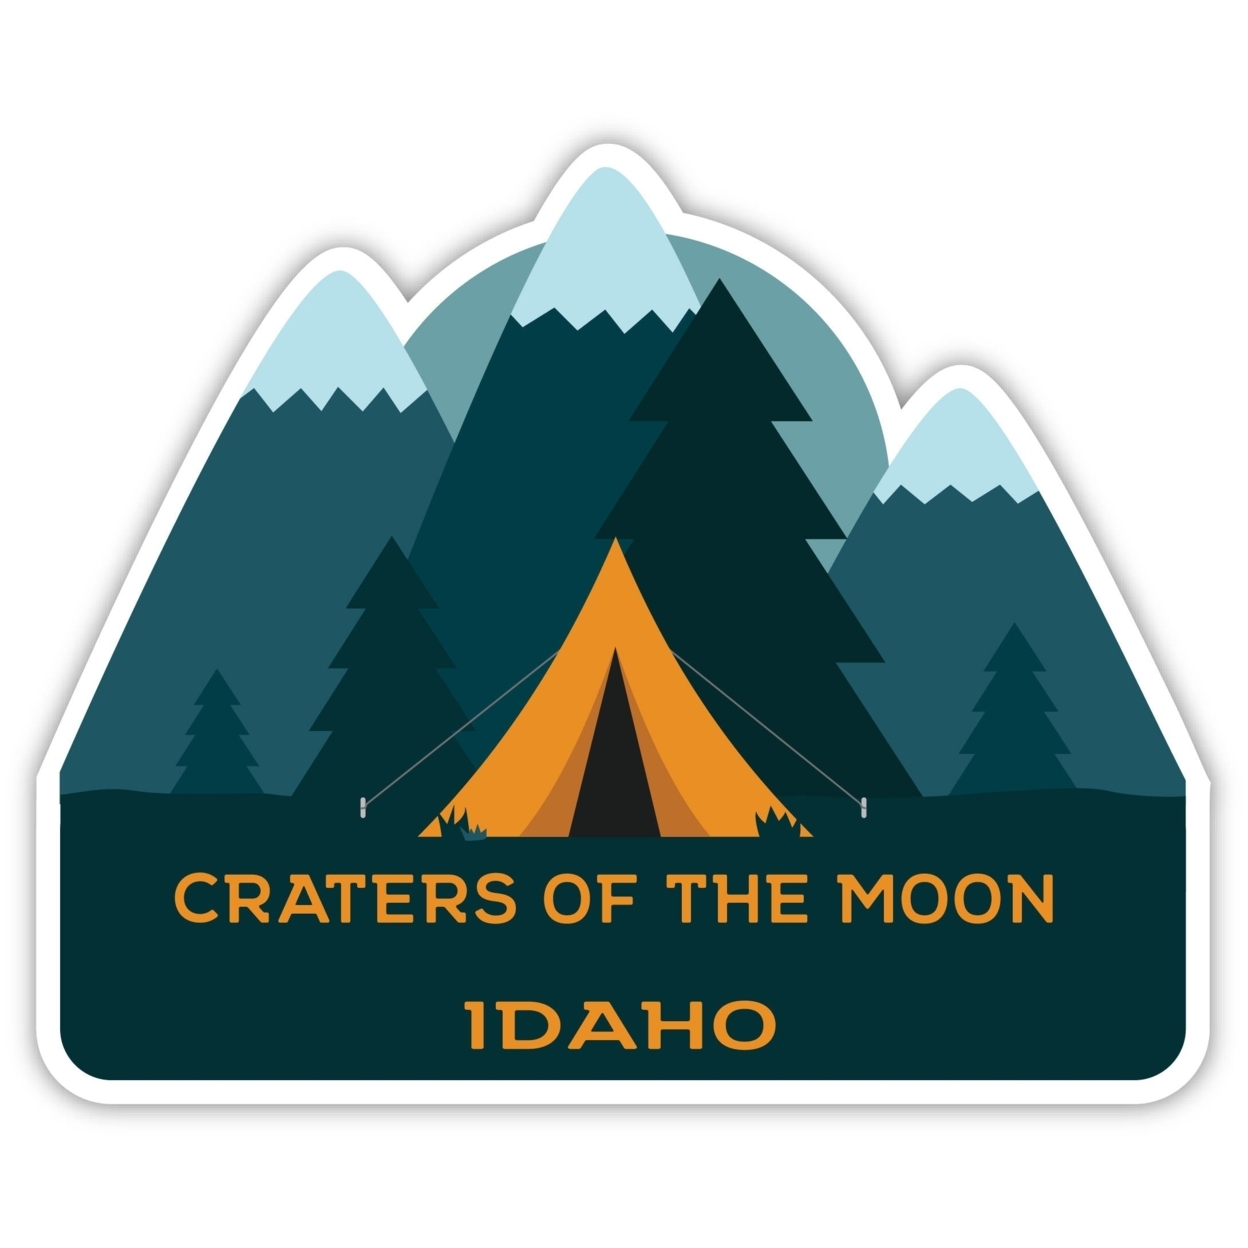 Craters Of The Moon Idaho Souvenir Decorative Stickers (Choose Theme And Size) - Single Unit, 4-Inch, Bear